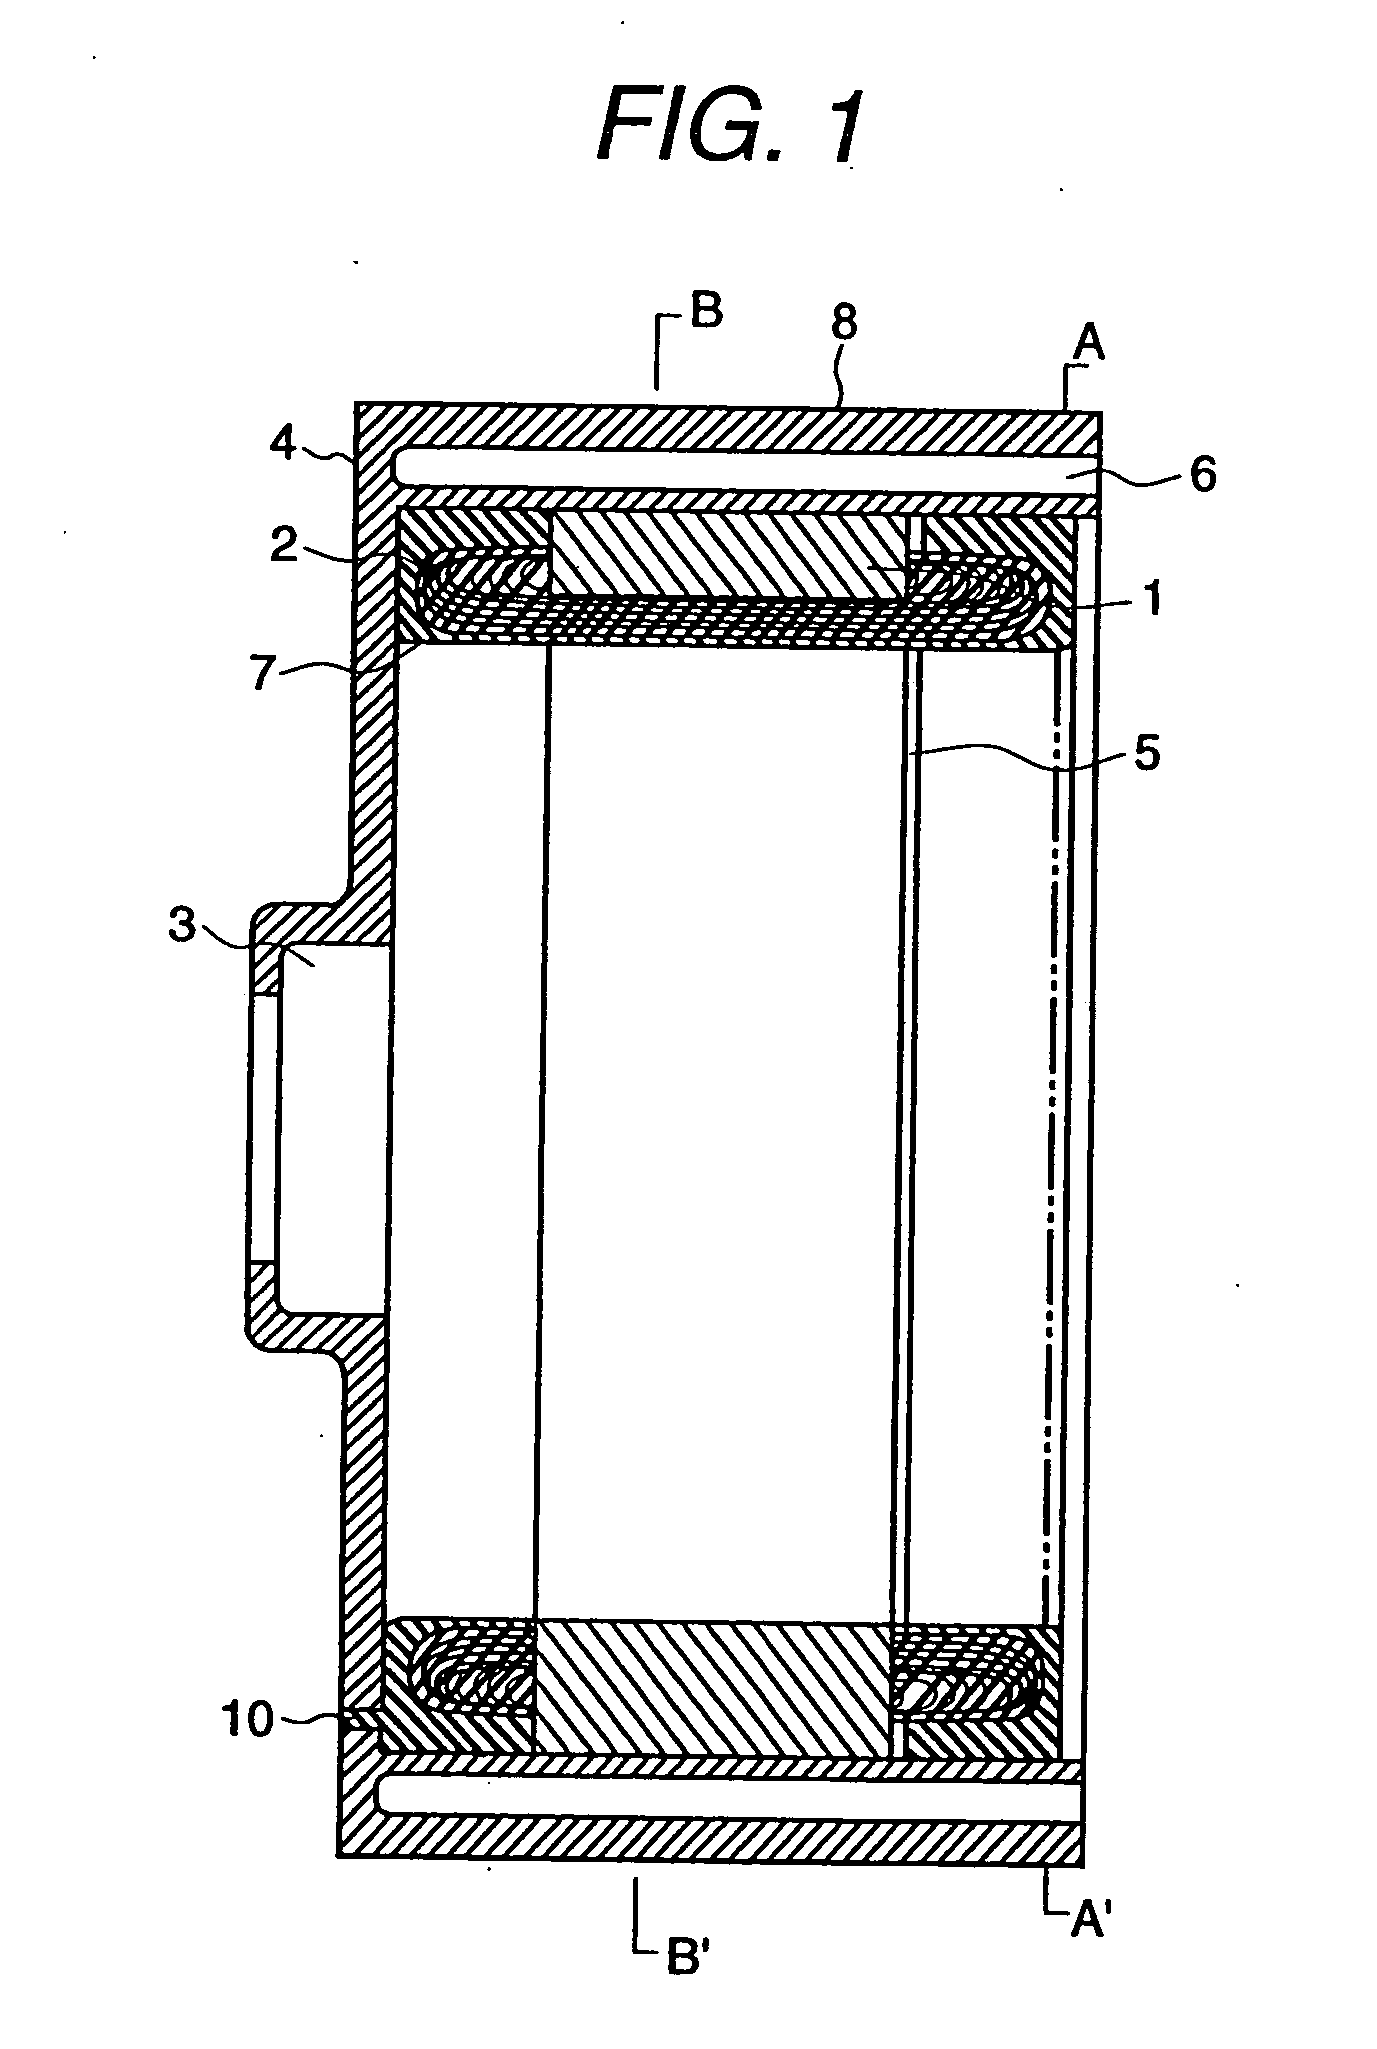 Method of manufacturing a resin-molded stator